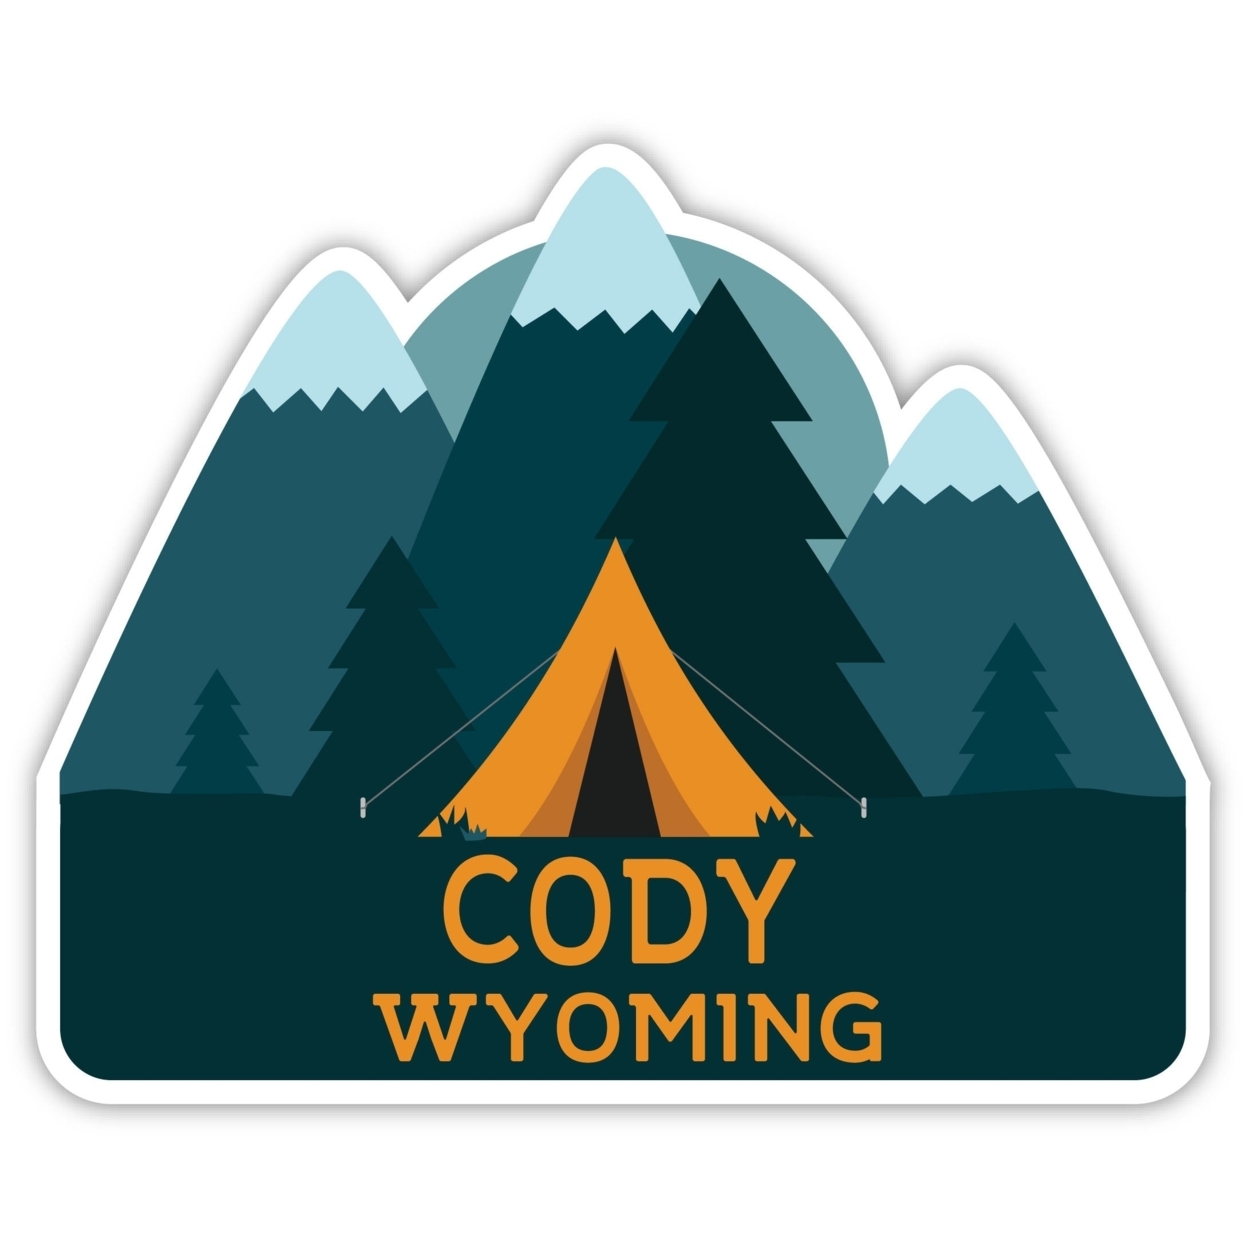 Cody Wyoming Souvenir Decorative Stickers (Choose Theme And Size) - 4-Pack, 4-Inch, Tent